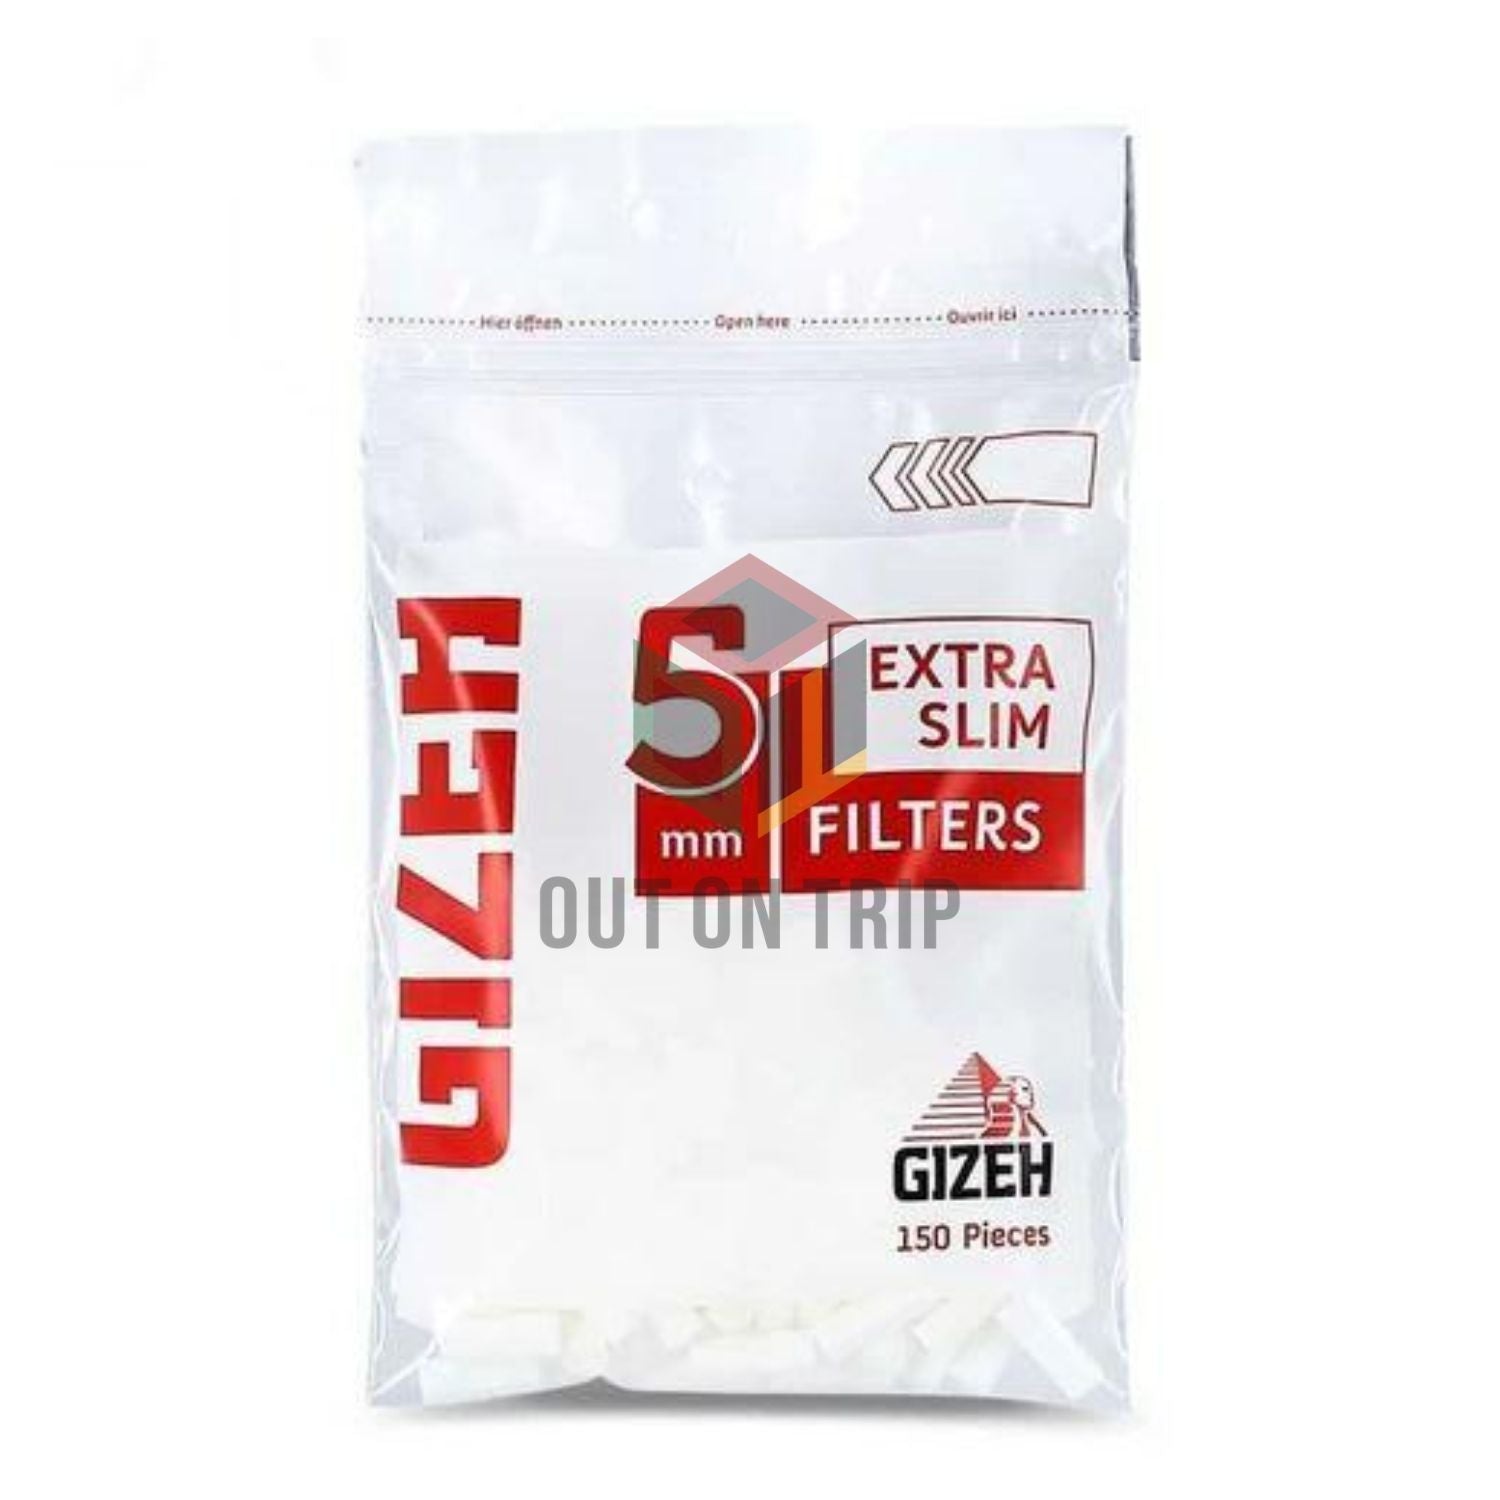 Gizeh XL Slim Filters (6mm) – THE ROLL N' PUFF